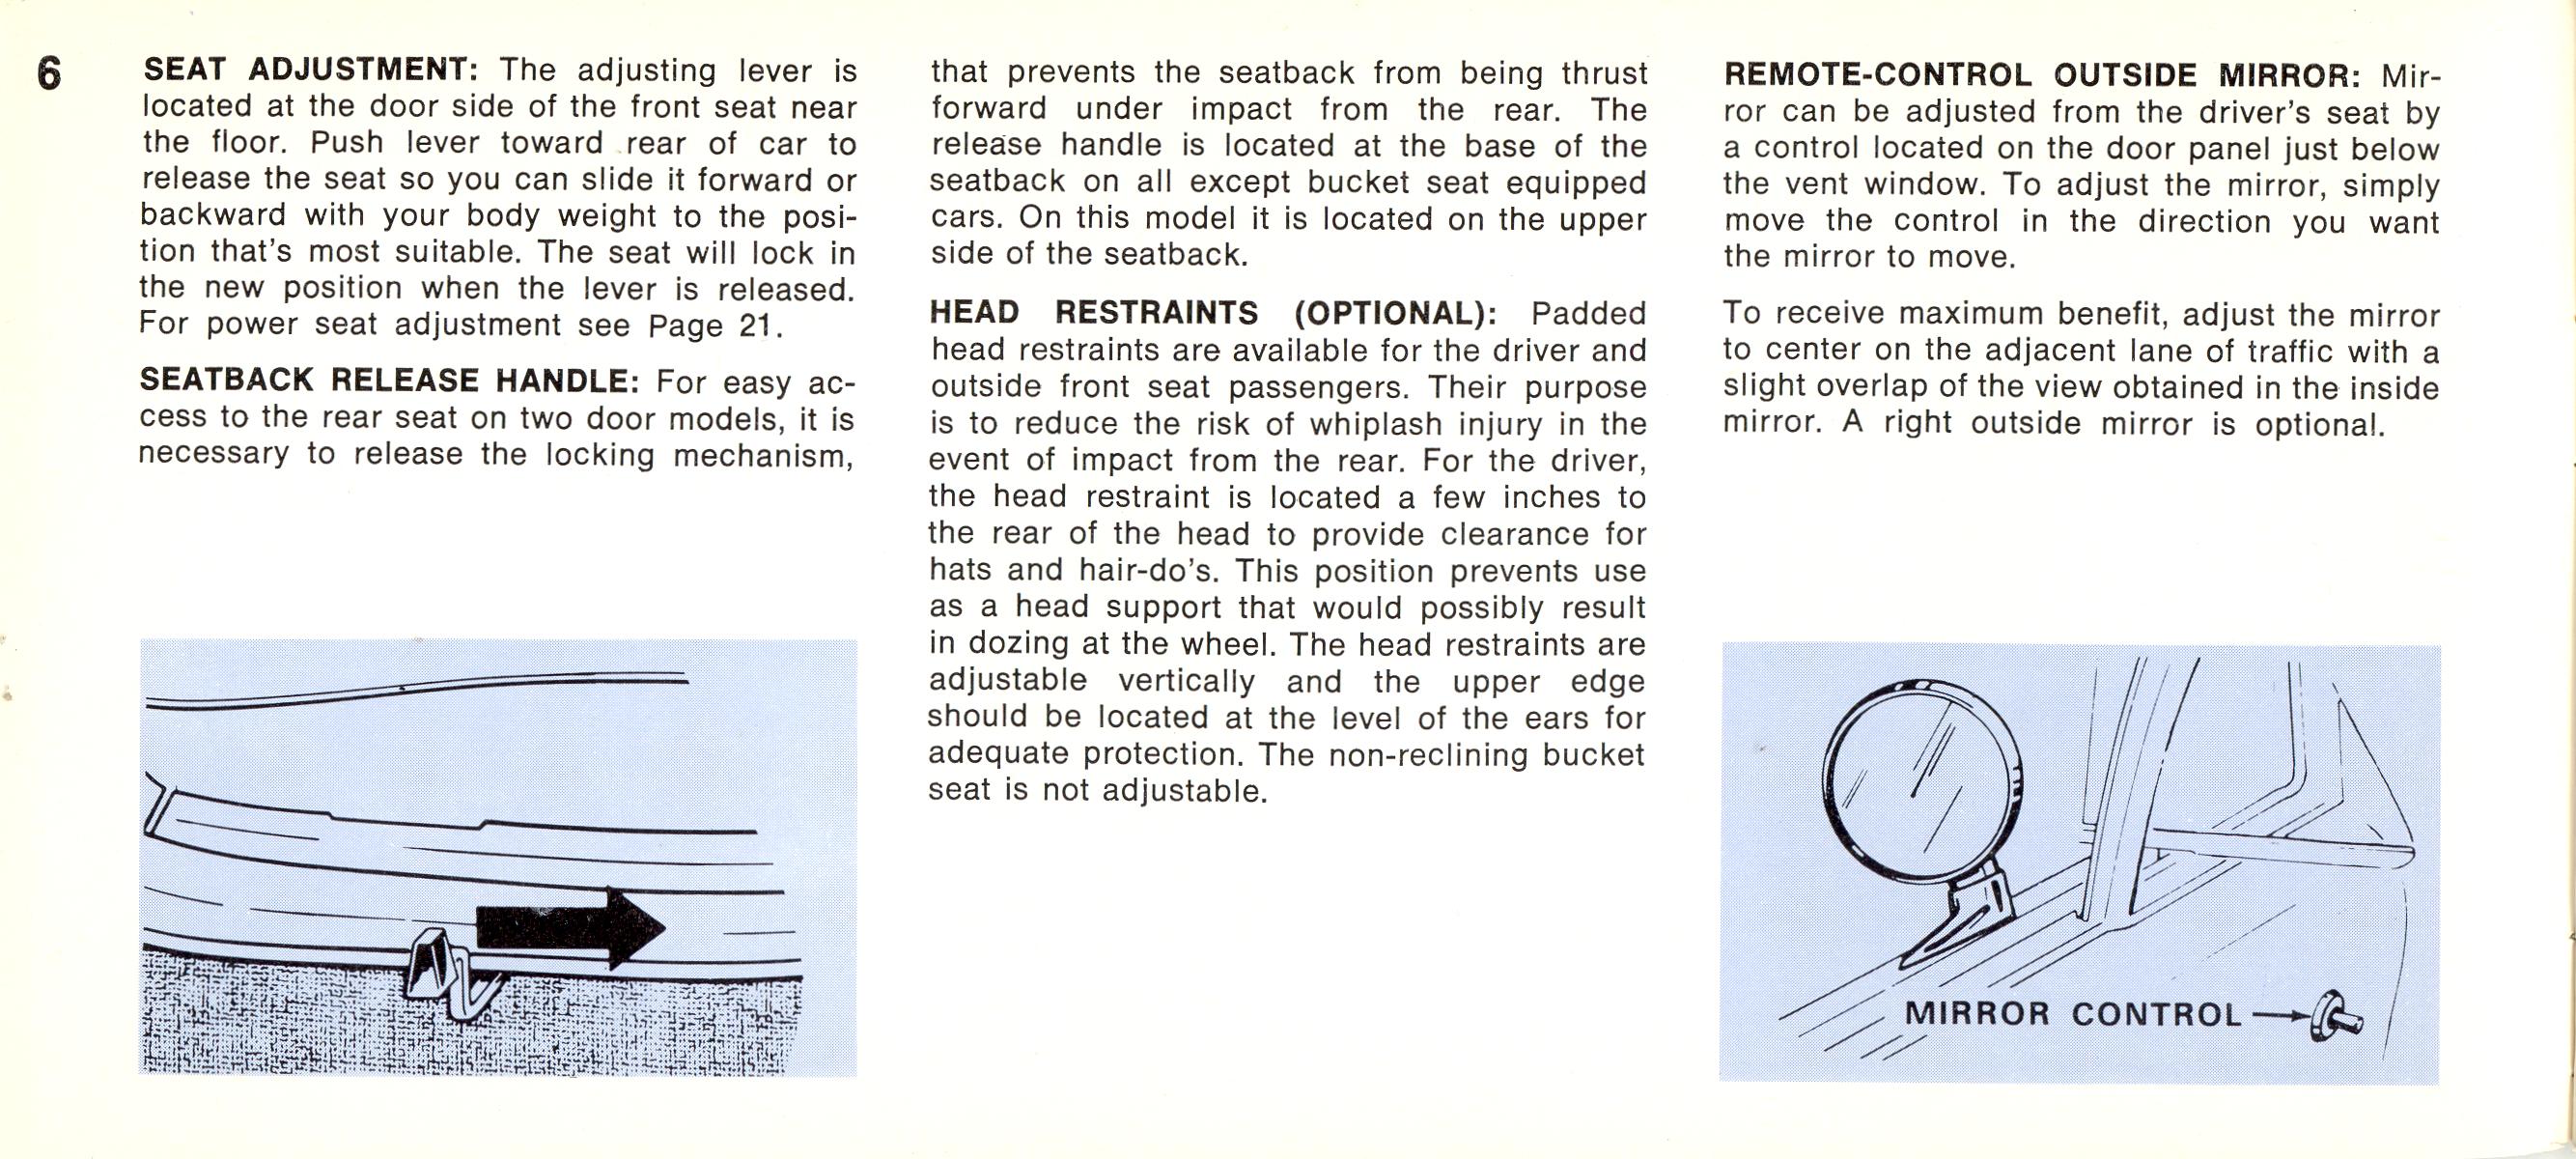 1968 Chrysler Imperial Owners Manual Page 50